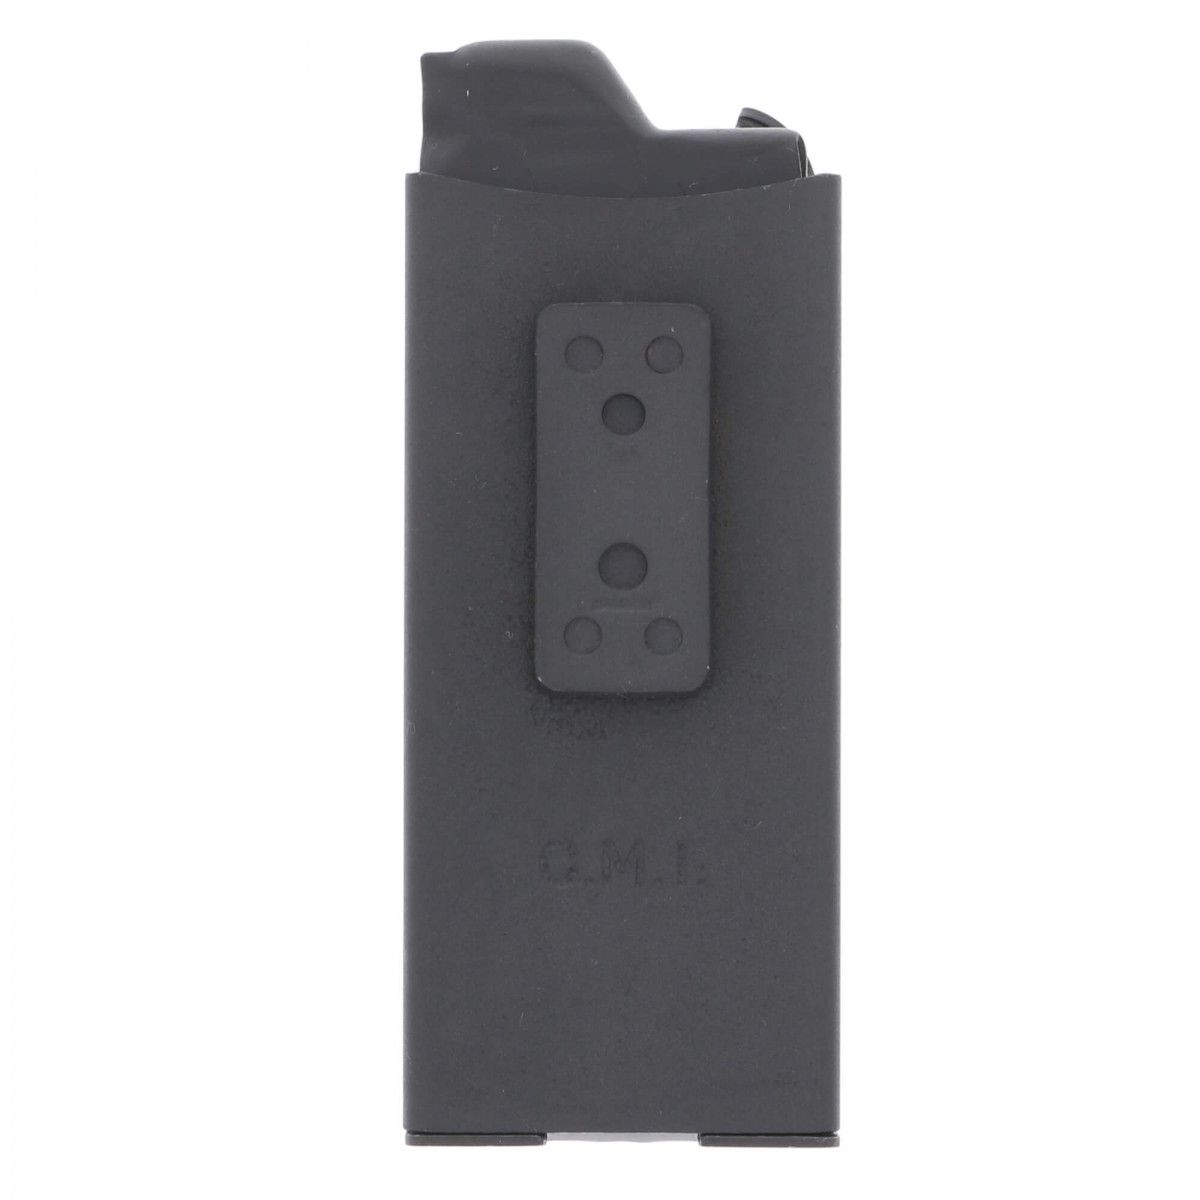 checkmate industries m1a magazines review